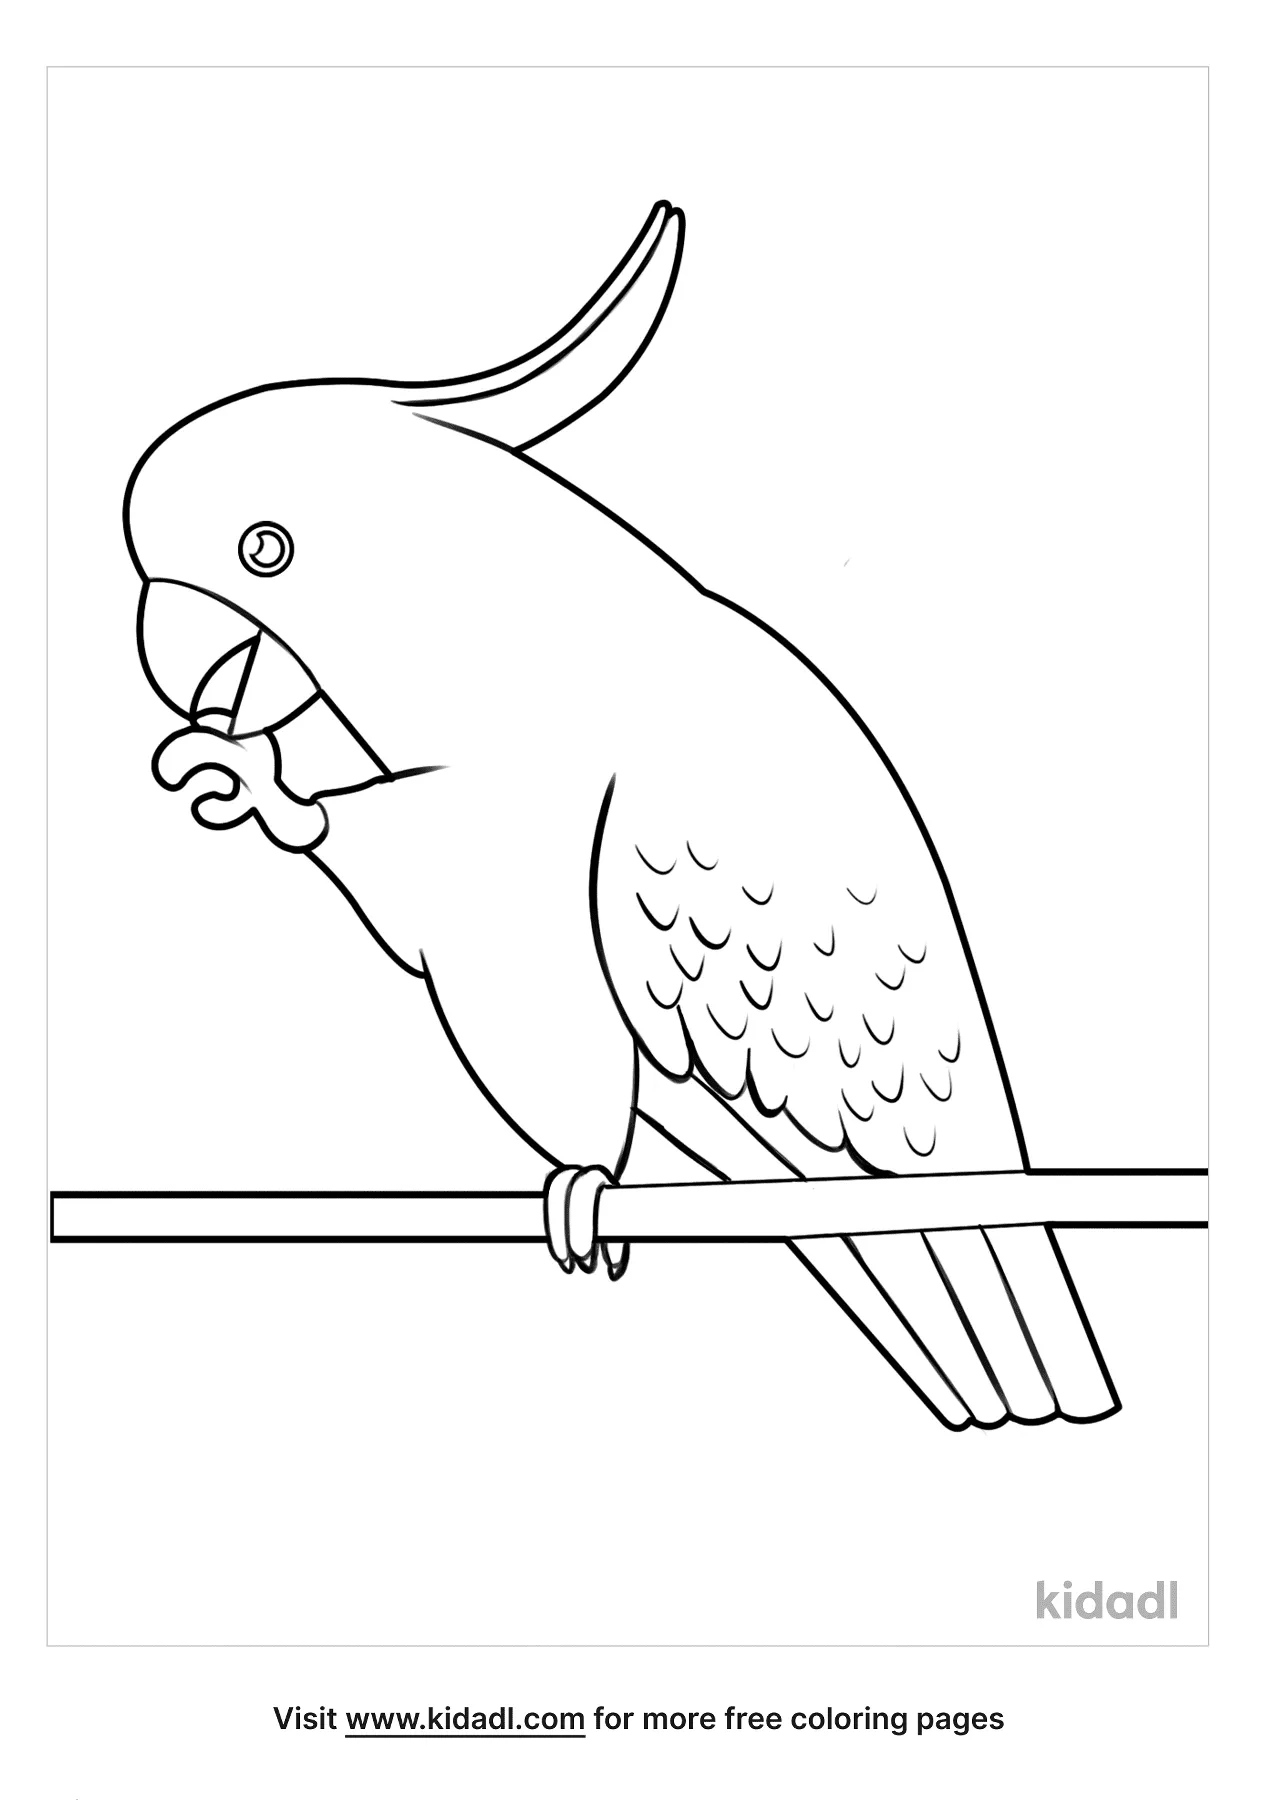 Parrot Coloring Pages   Free Birds Coloring Pages   Kidadl